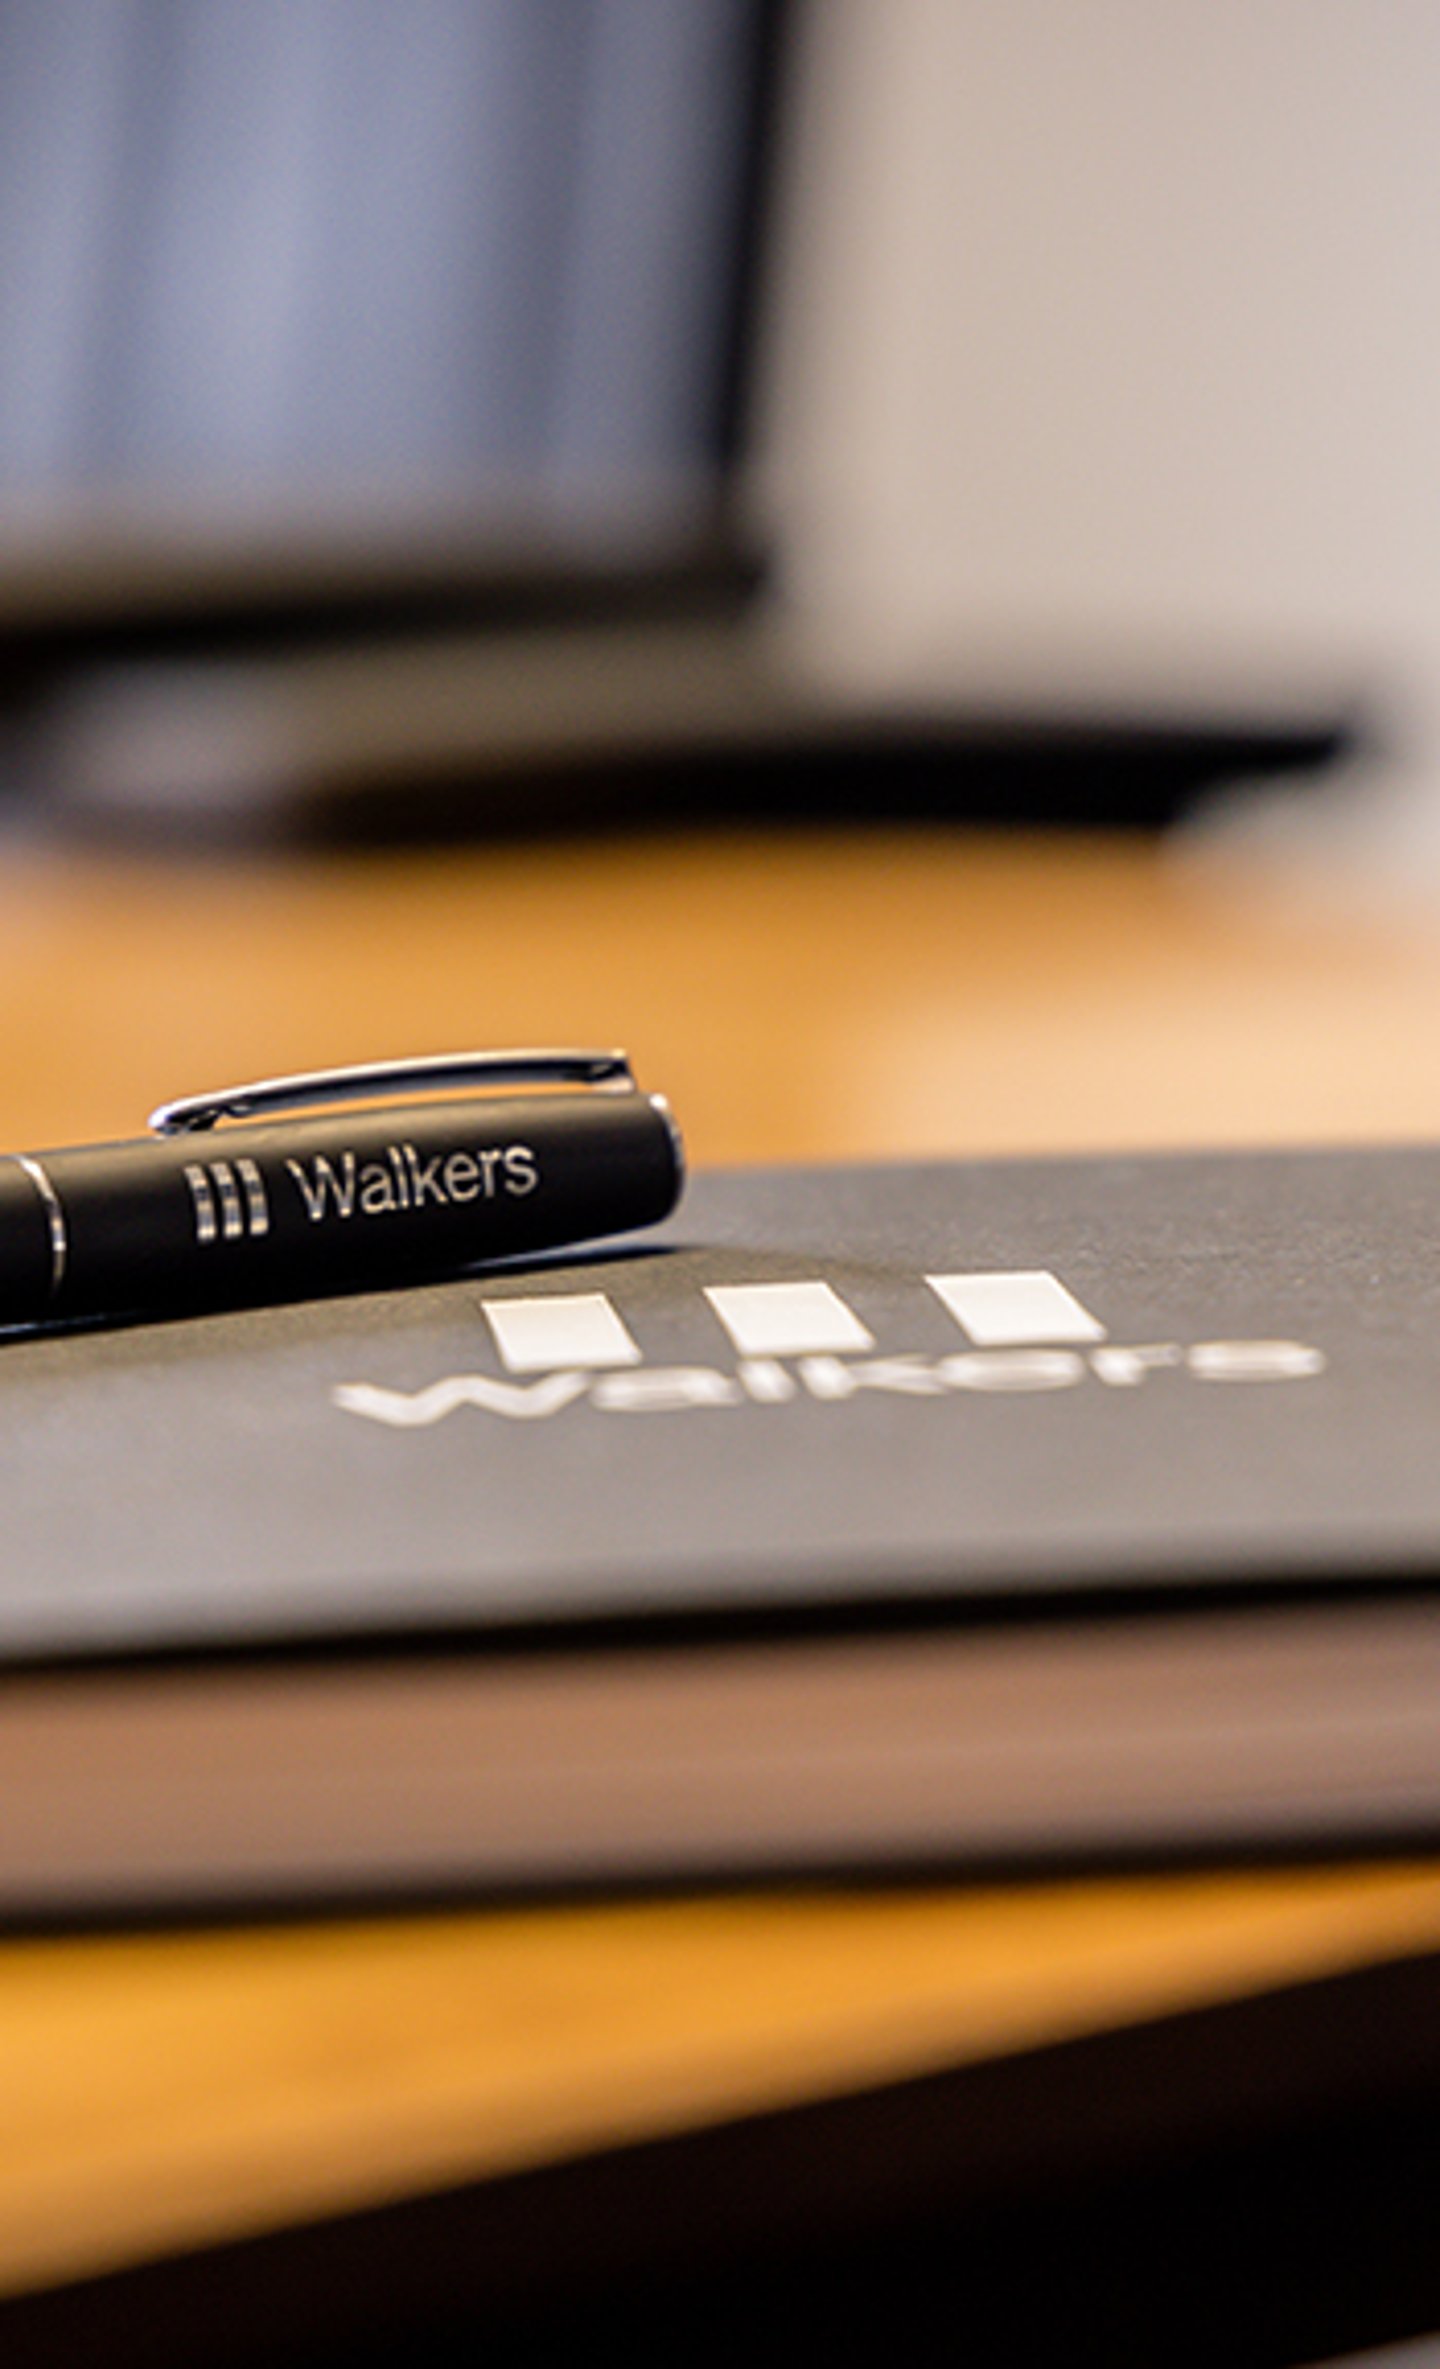 A sleek black pen with 'Walkers' branding lies atop a closed notebook, both featuring raised 'Walkers' logos.